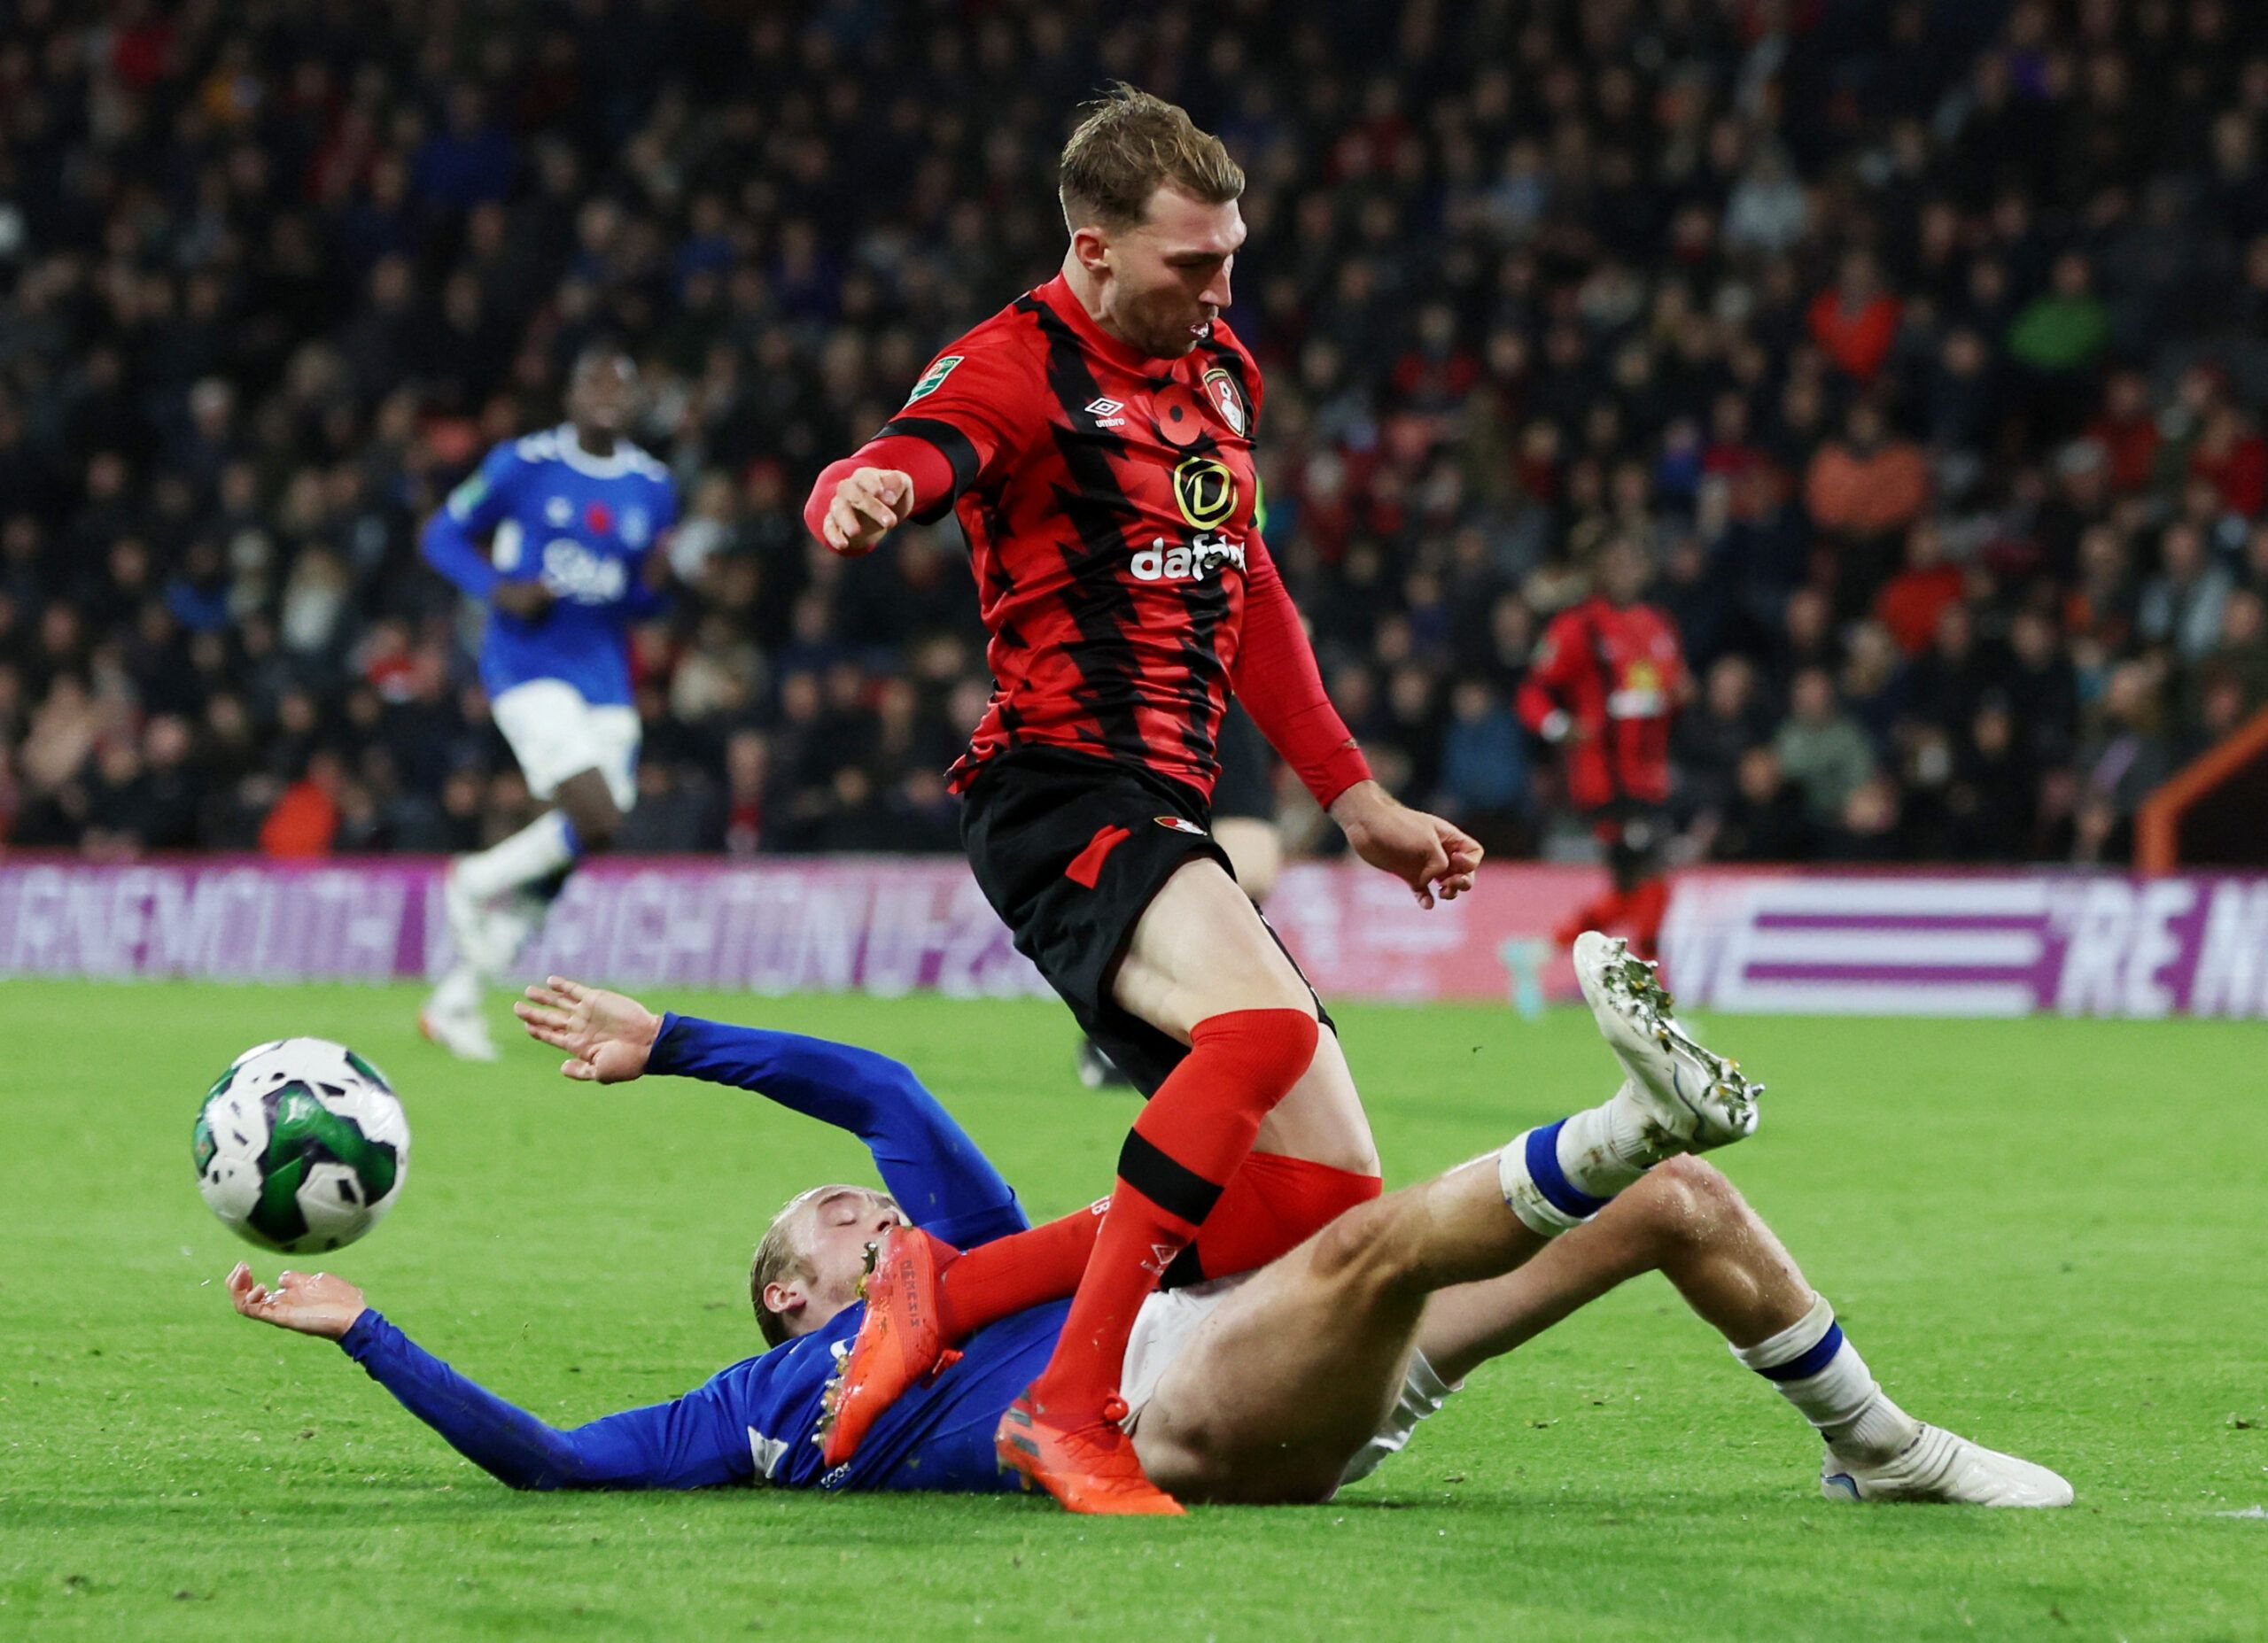 Soccer Football - Carabao Cup Third Round - AFC Bournemouth v Everton - Vitality Stadium, Bournemouth, Britain - November 8, 2022 AFC Bournemouth's Jack Stacey in action with Everton's Tom Davies Action Images via Reuters/Paul Childs EDITORIAL USE ONLY. No use with unauthorized audio, video, data, fixture lists, club/league logos or 'live' services. Online in-match use limited to 75 images, no video emulation. No use in betting, games or single club /league/player publications.  Please contact y